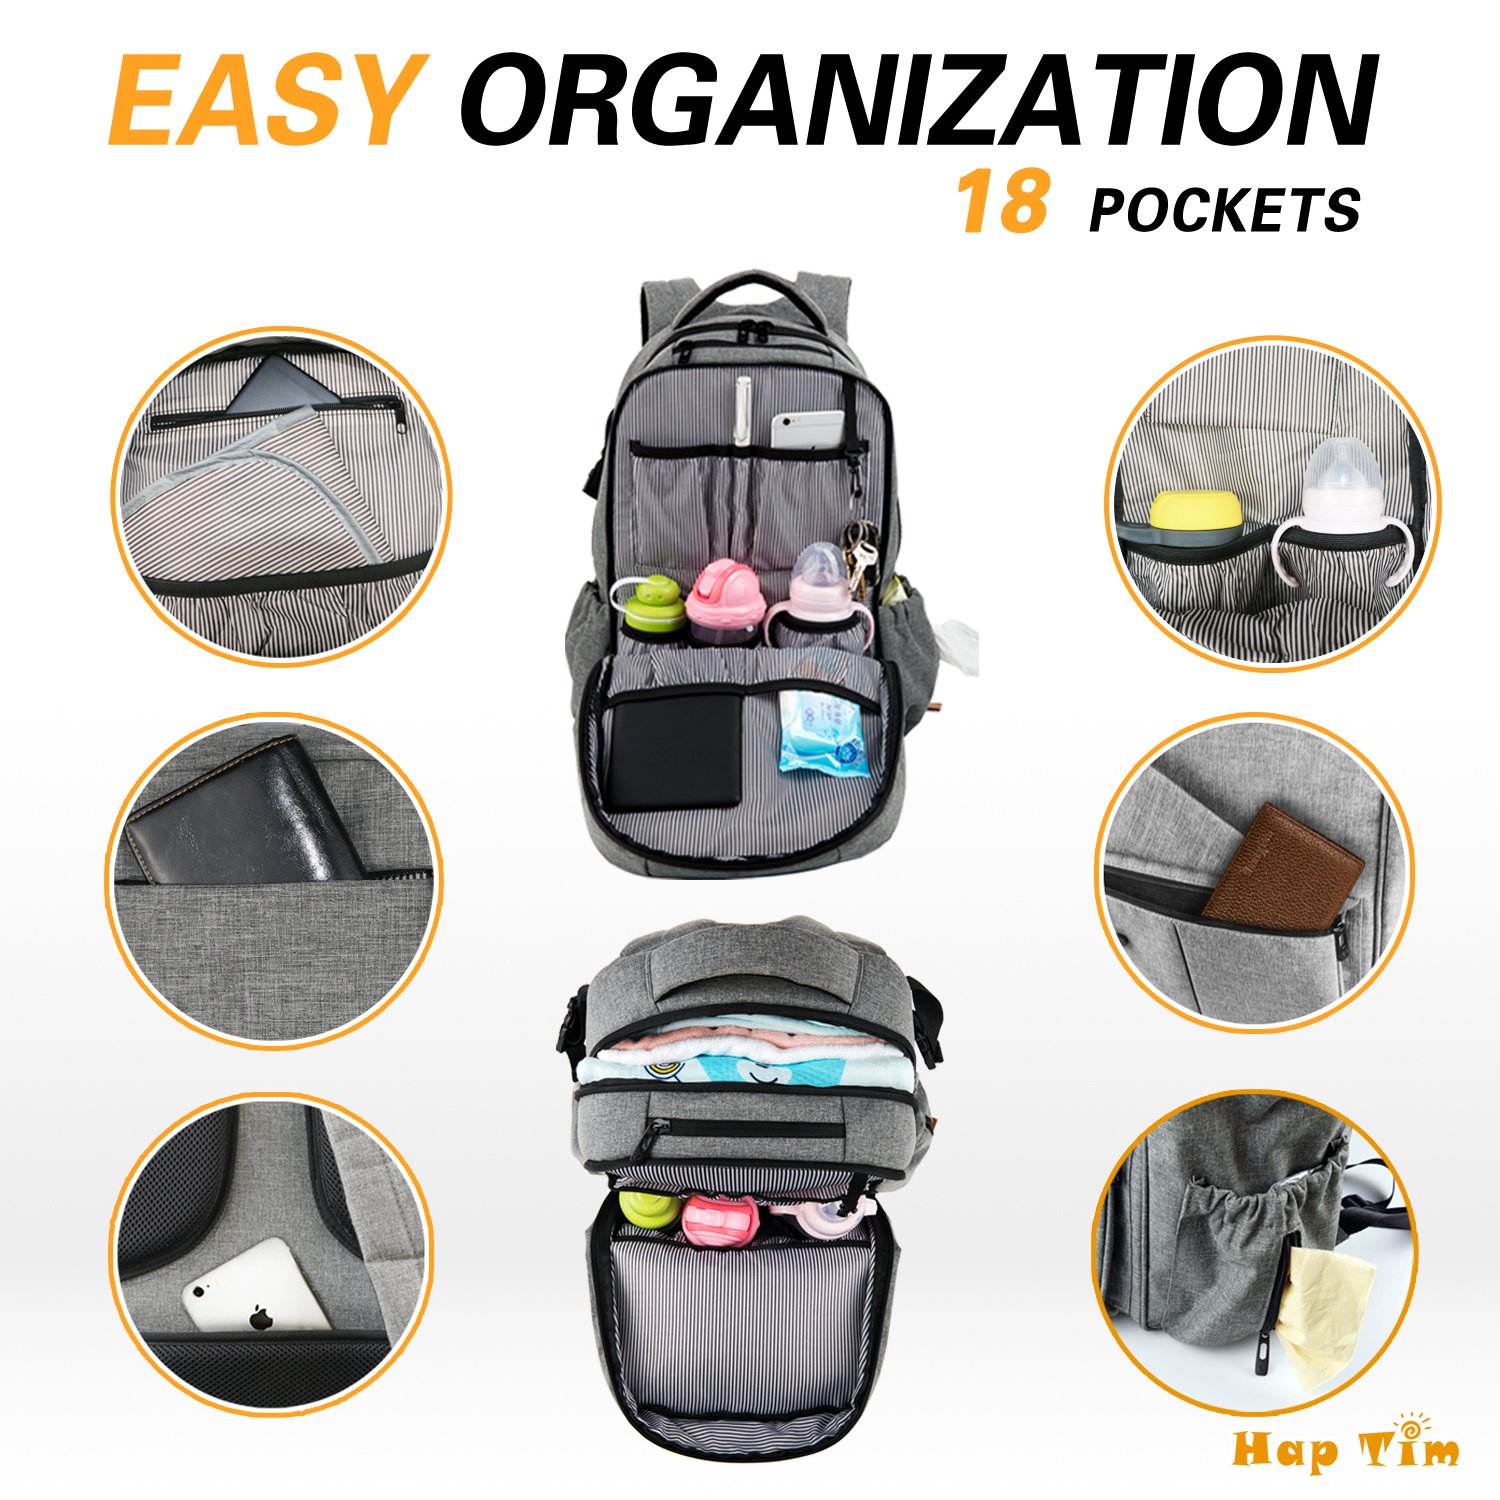 Hap Tim Multi-Function Large Baby Diaper Bag Backpack W/Stroller Straps-Insulated Pockets-Changing Pad, Stylish & Durable with Anti-Water Material(Gray-5284)